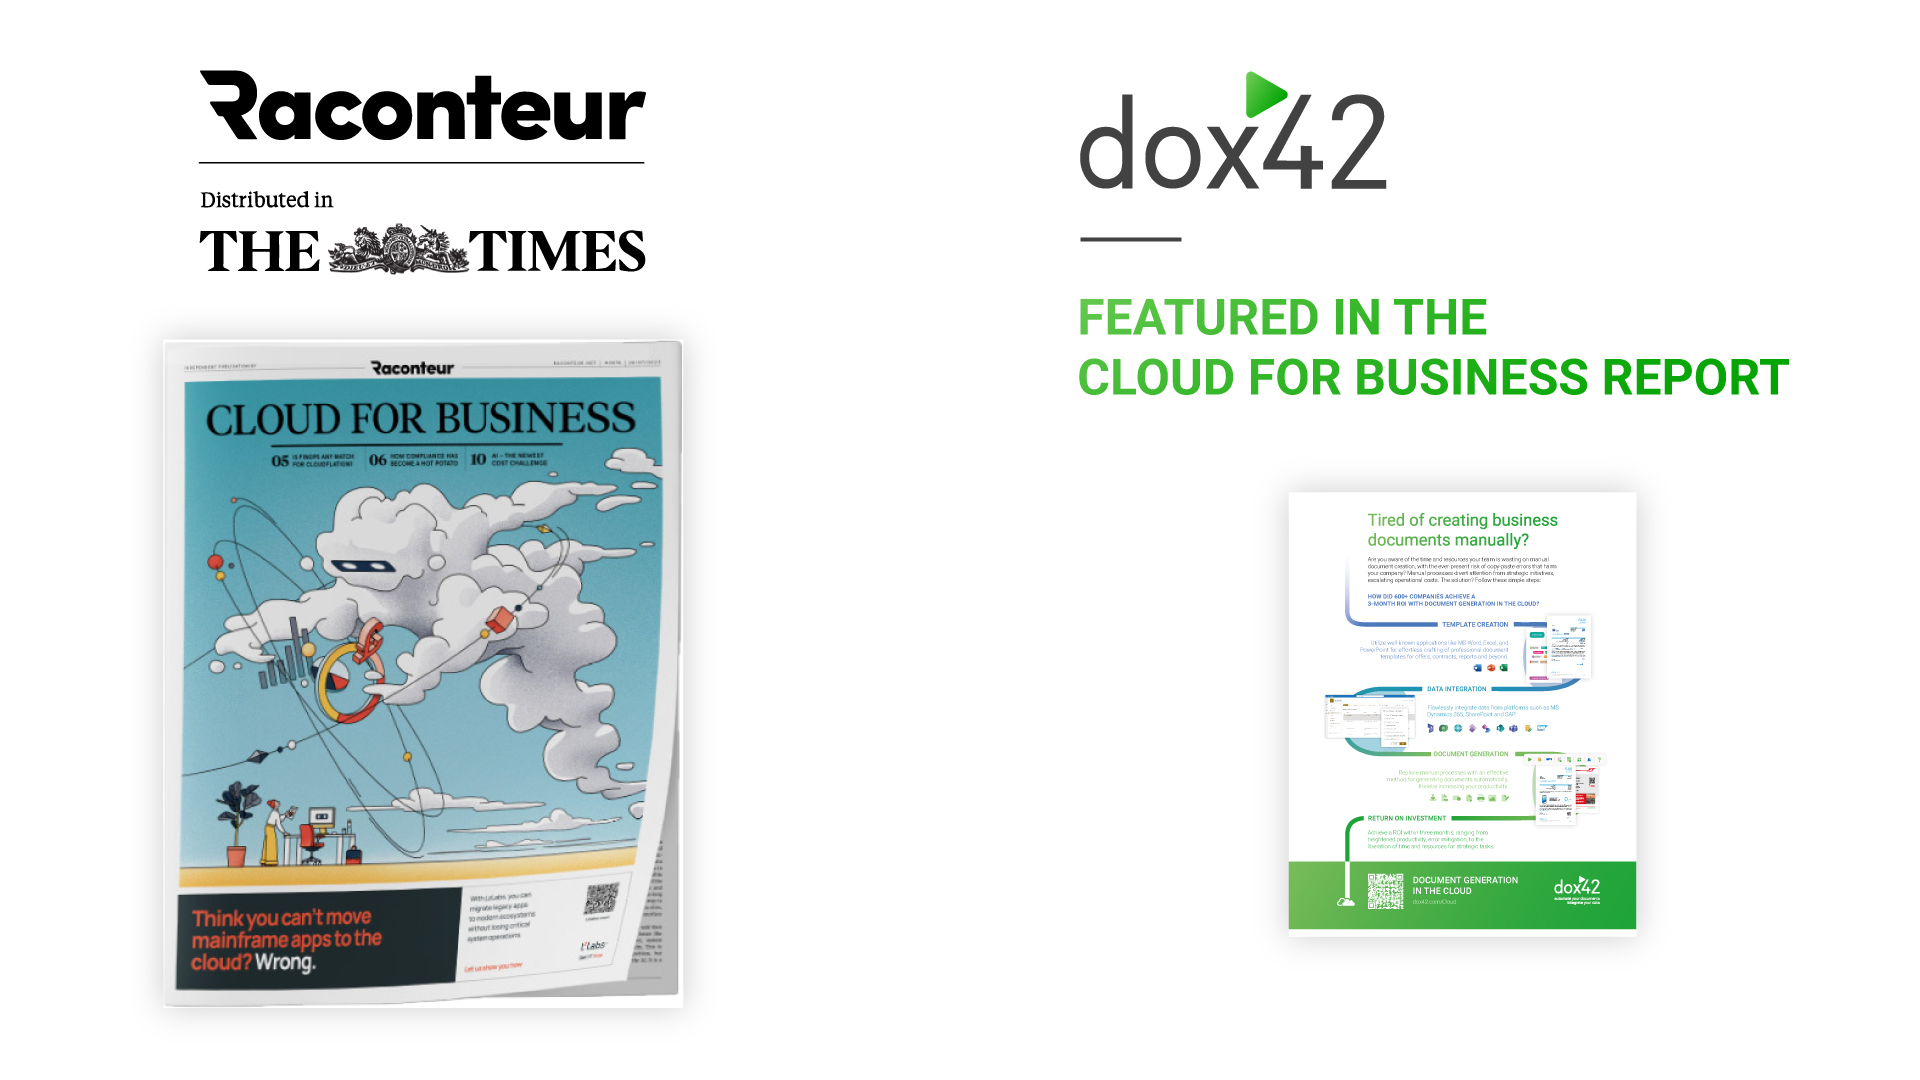 dox42 featured in Times Cloud Report